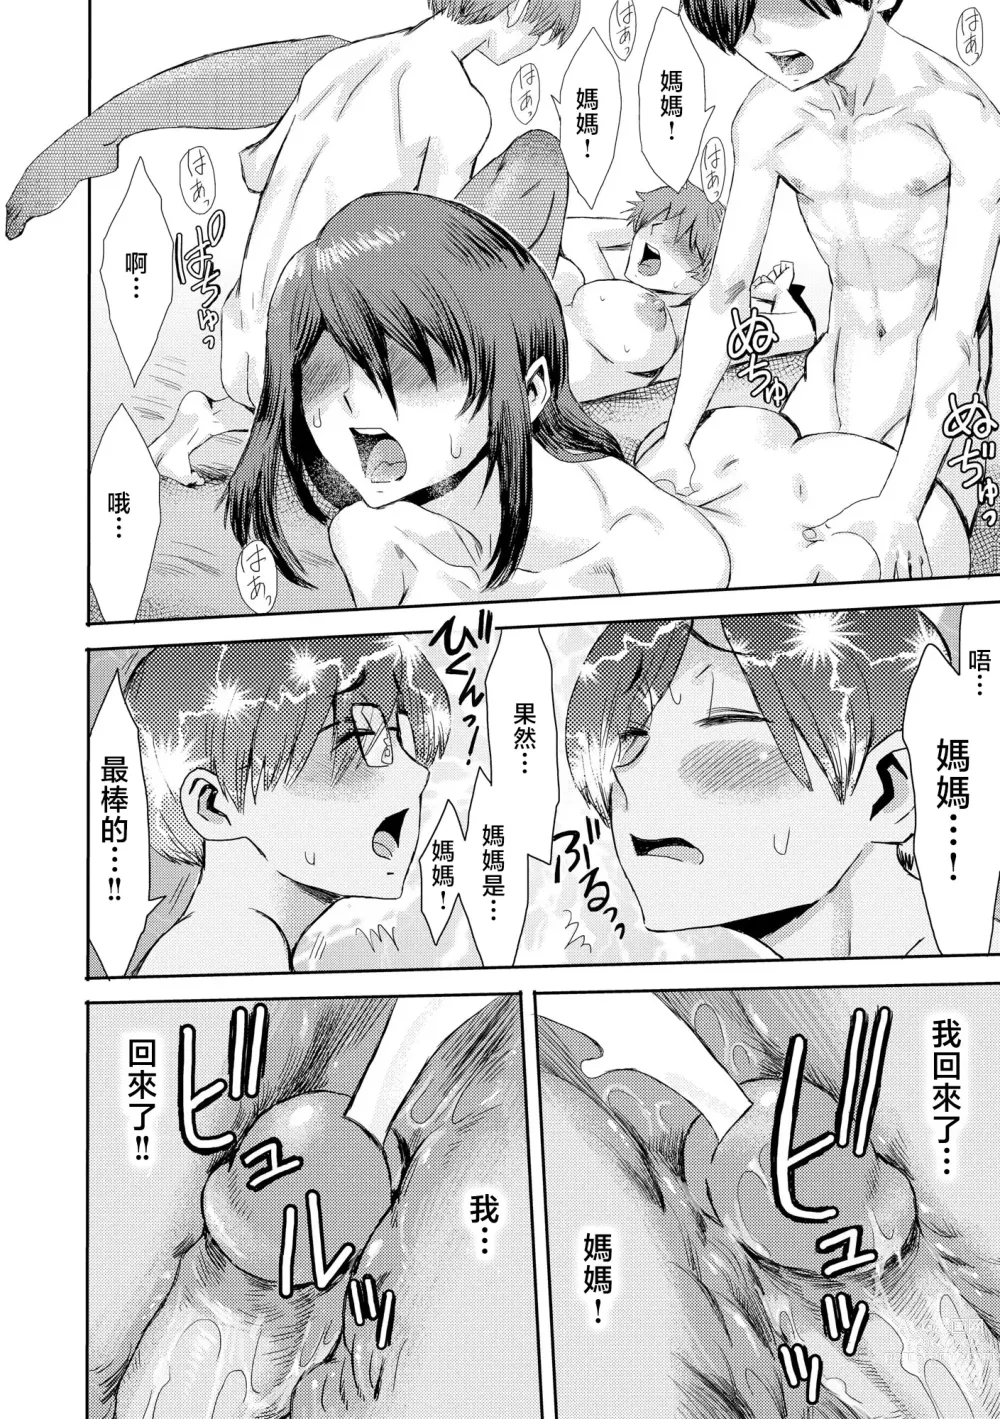 Page 145 of manga Soukan Syndrome (decensored)